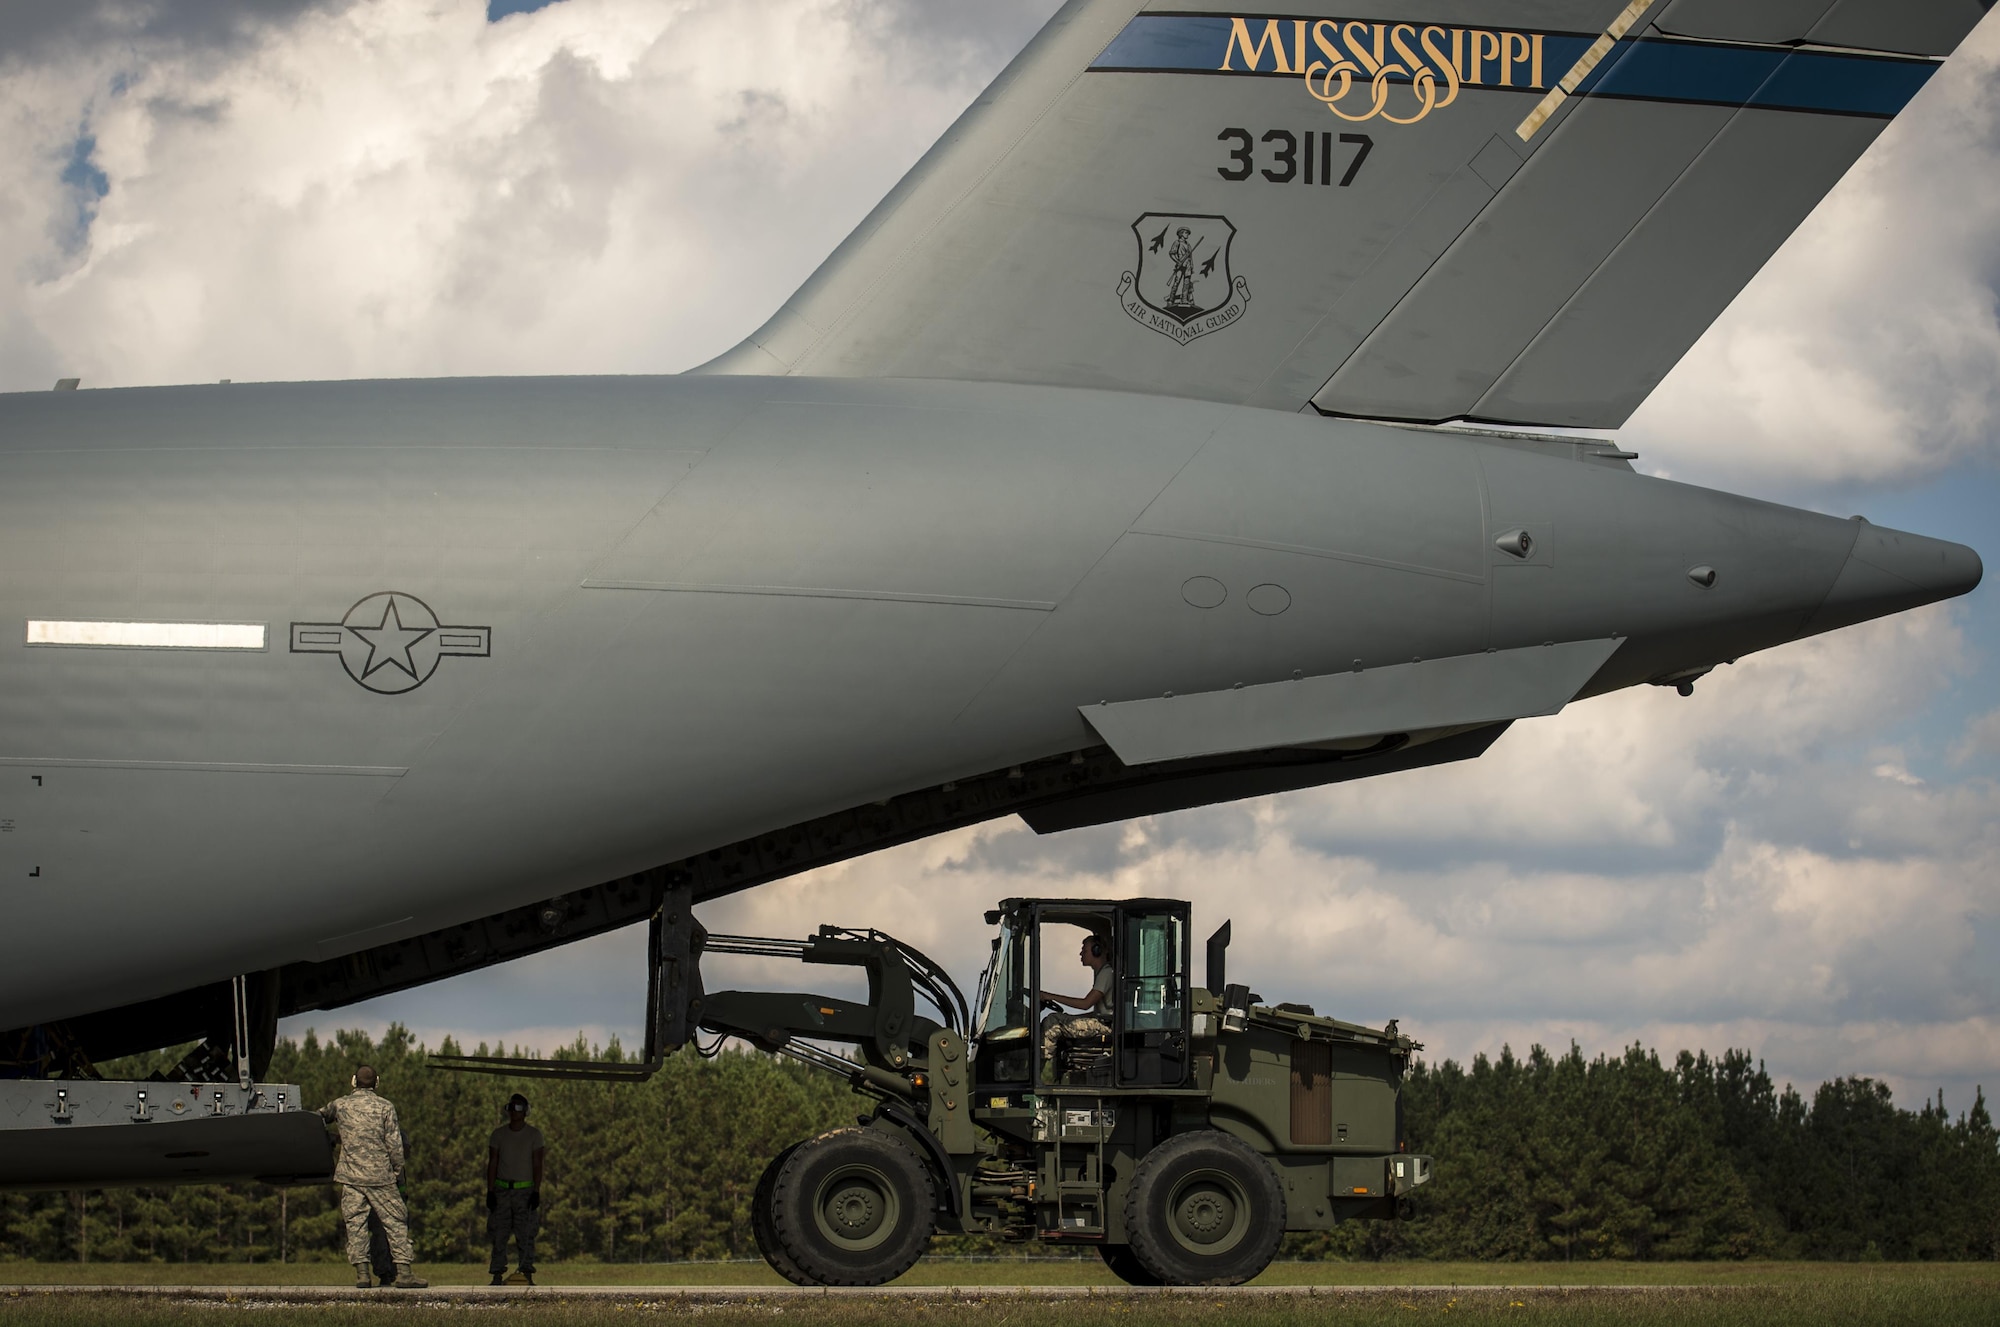 Airmen from the 321st Contingency Response Squadron and Soldiers from the 689th Rapid Port Opening Element offload cargo from a Mississippi Air National Guard C-17 Globemaster III on the flightline at Camp Shelby Joint Forces Training Center, Miss., during exercise Turbo Distribution Oct. 29, 2015. The U.S. Transportation Command exercise tested the Joint Task Force Port-Opening's ability to deliver and distribute cargo during humanitarian relief operations. The 321st CRS is from Joint Base McGuire-Dix-Lakehurst, N.J., and the 689th RPOE is from Joint Base Langley-Eustis, Va. (U.S. Air Force photo/Staff Sgt. Marianique Santos)